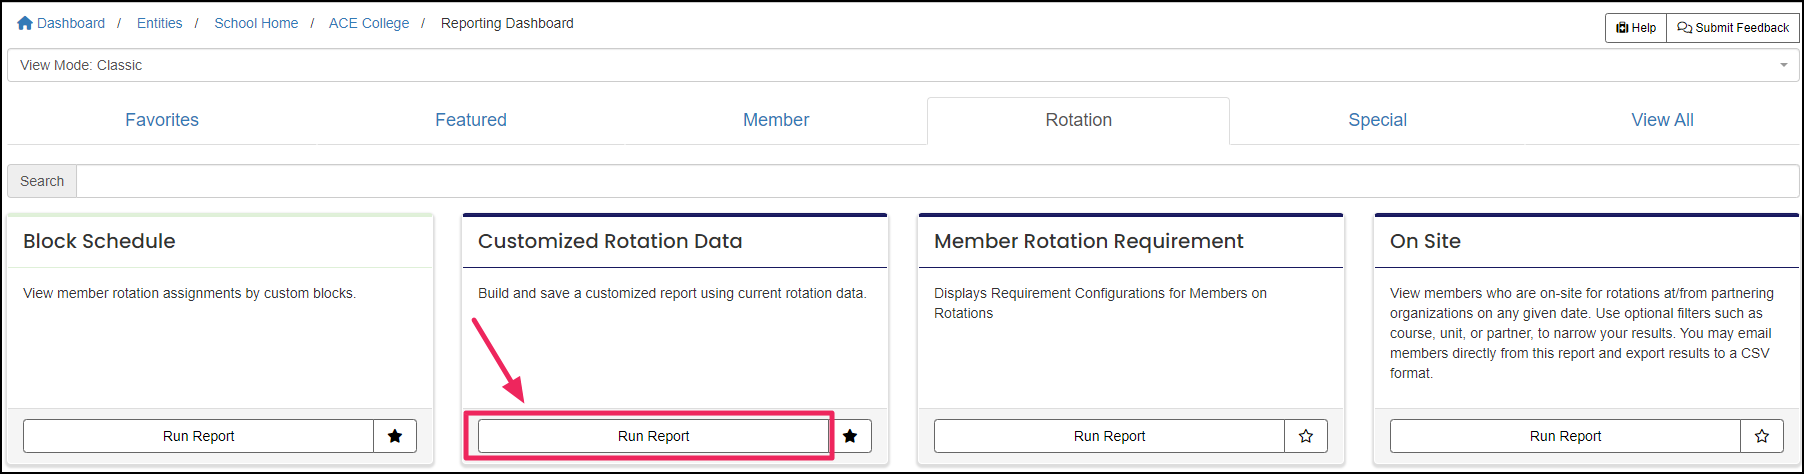 Image shows customized rotation data report and run report button.